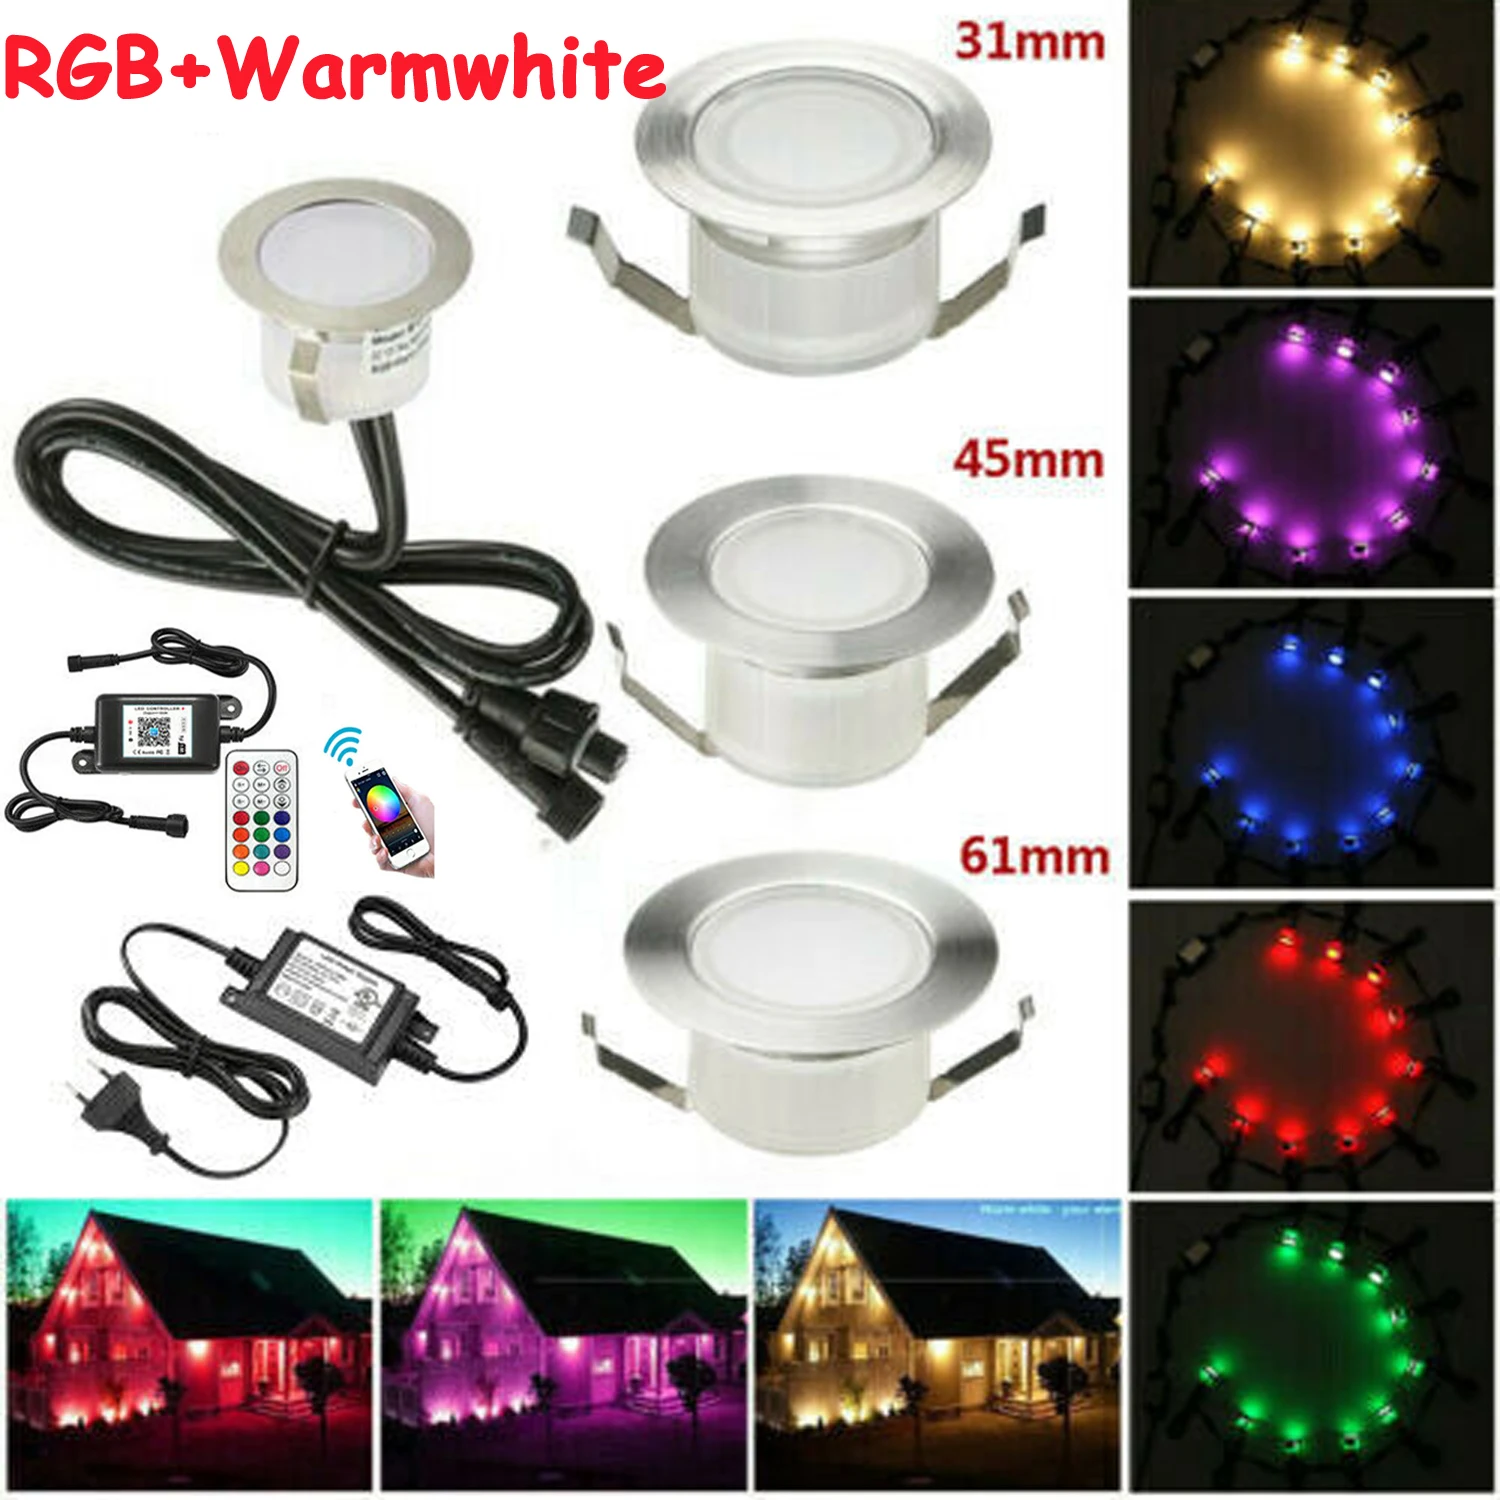 31mm-61mm WIFI Controlling RGB WW LED Recessed Floor Outdoor Patio Lamp IP67